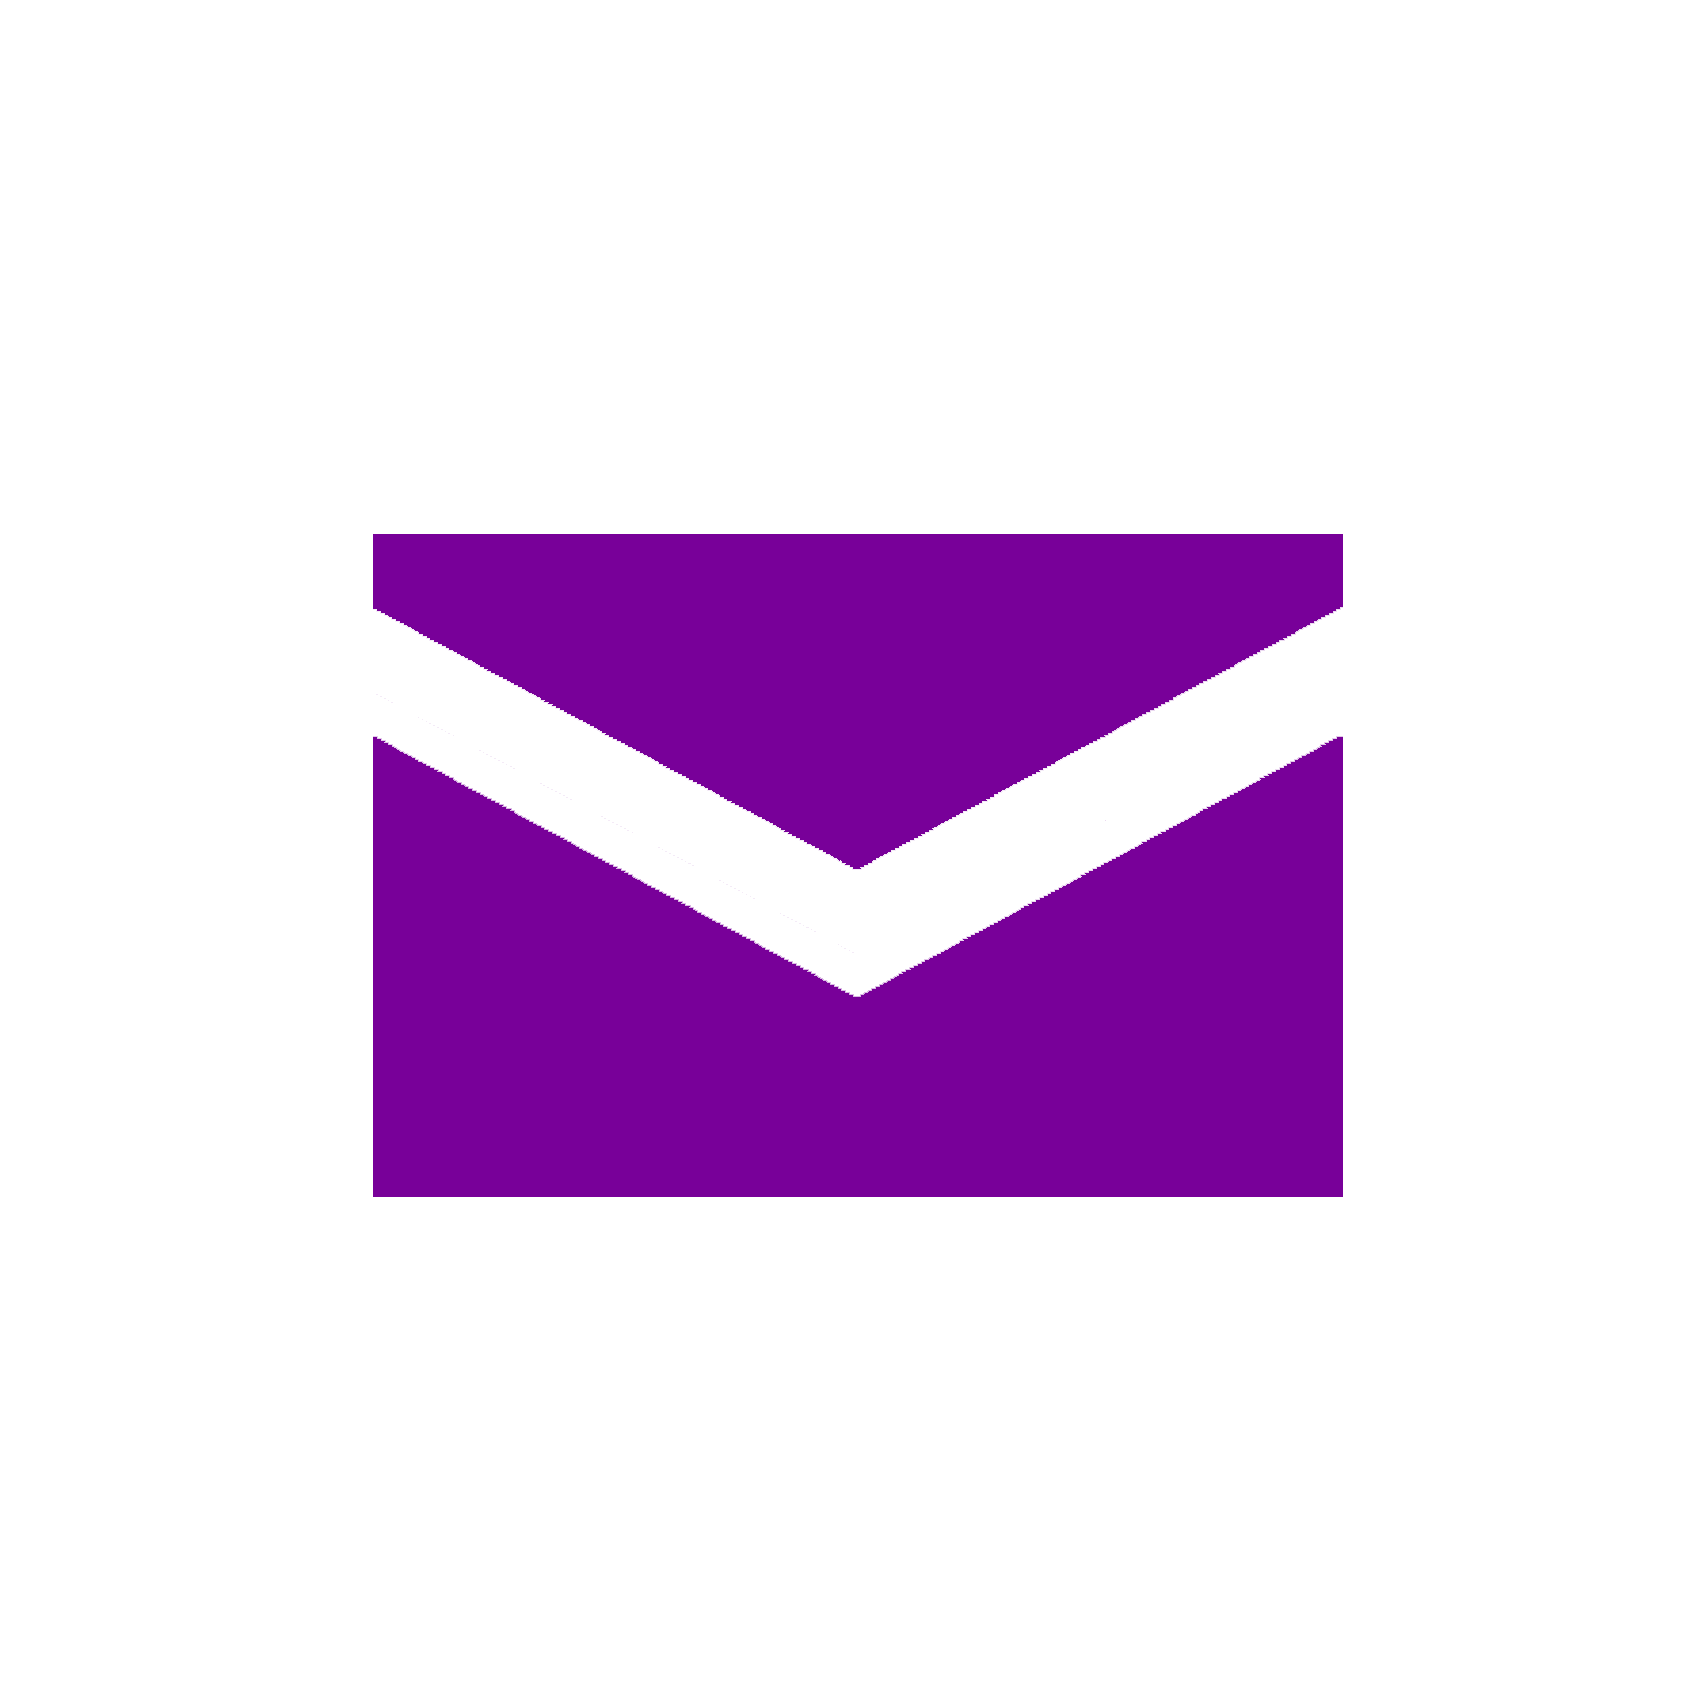 kisspng-yahoo-mail-email-company-message-purple-5ad1fa7fd3dd27.5881865515237105918678